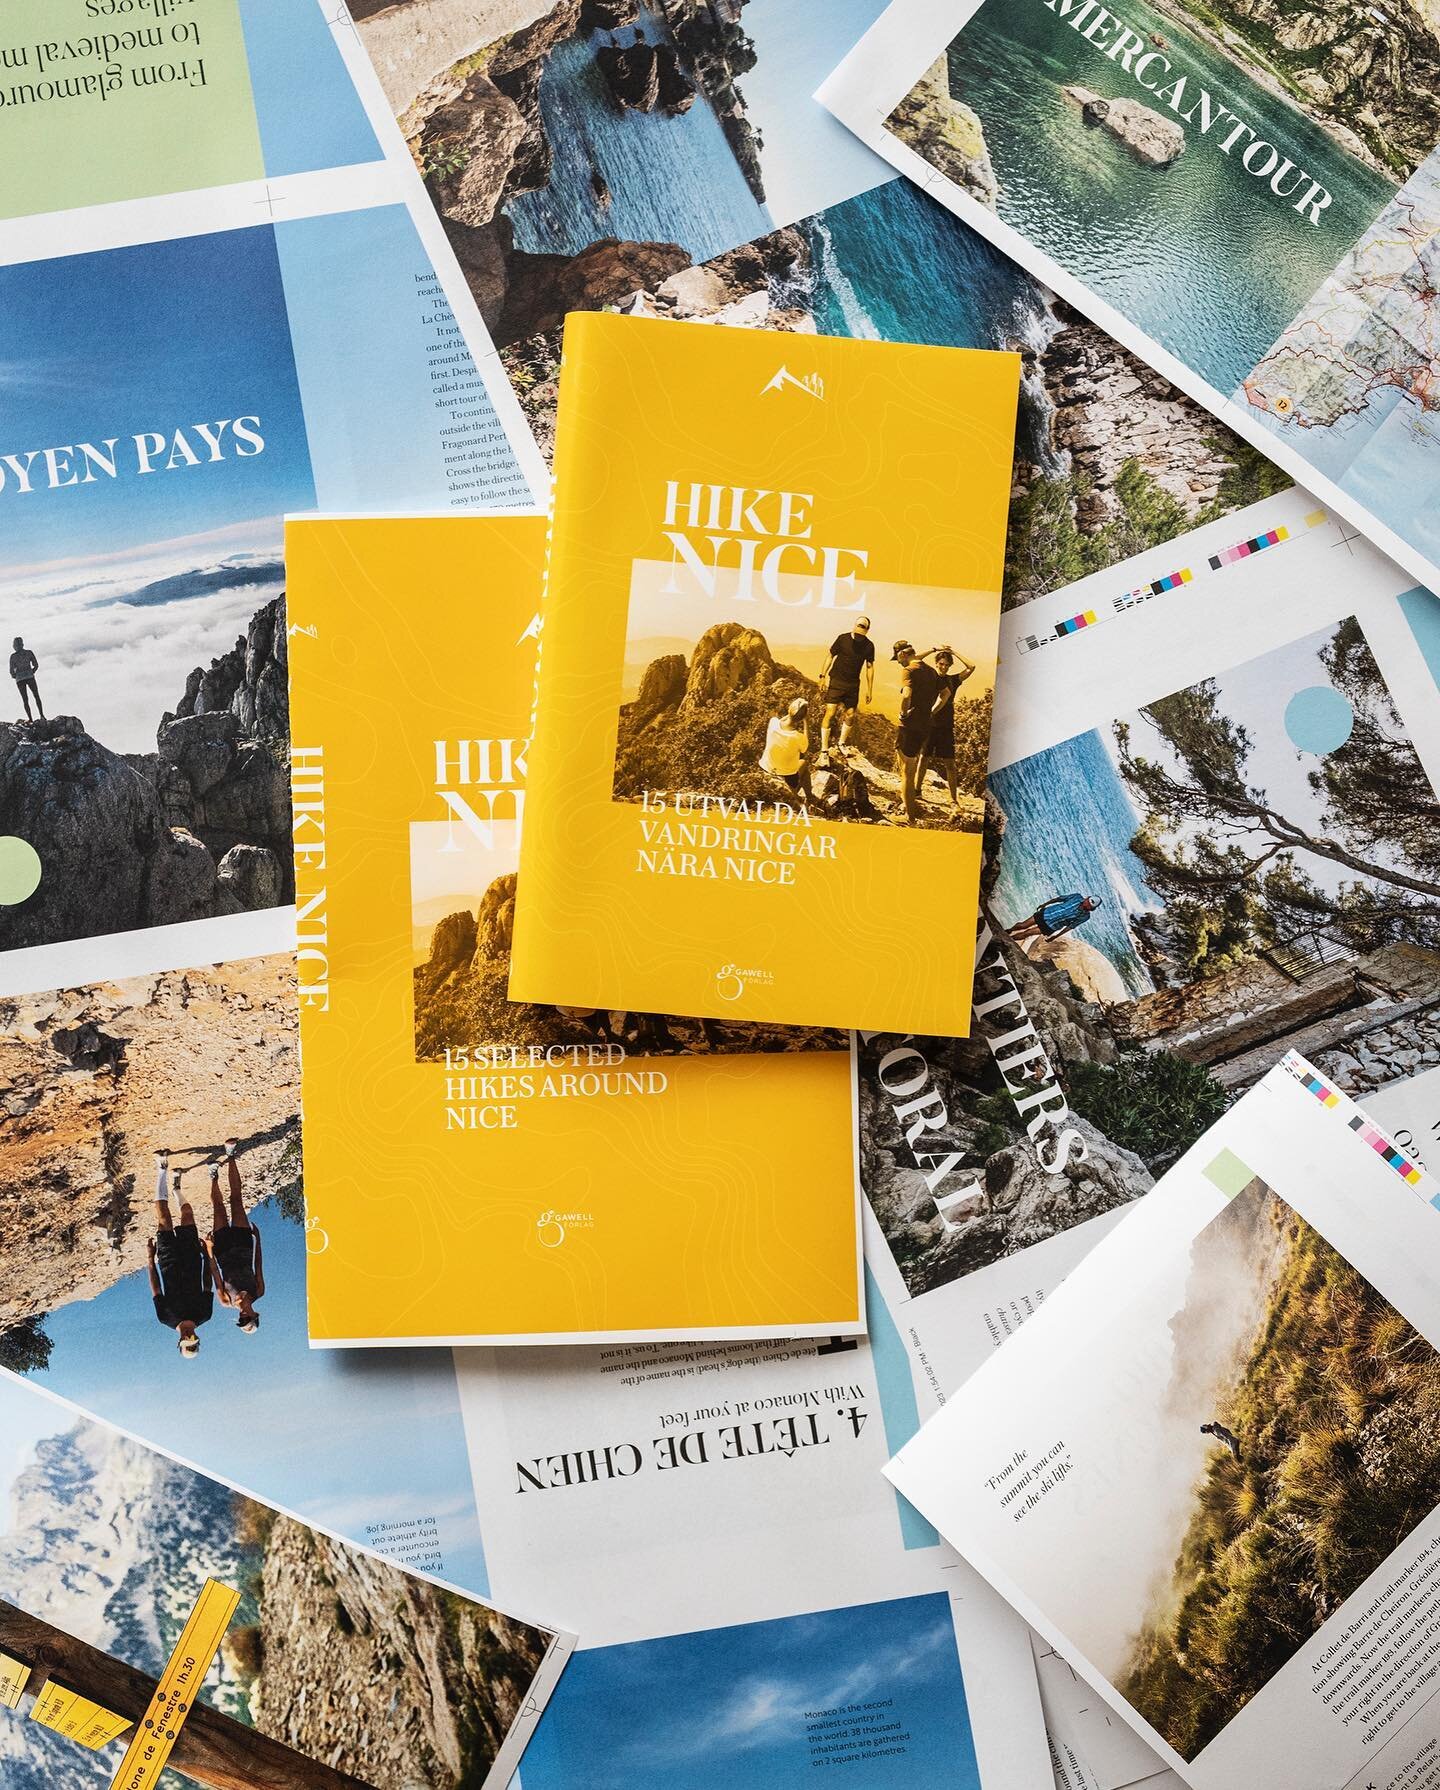 Print sheets just arrived! HIKE-NICE is the first book in our HIKE-guide series, a personal pick of the best hiking gems in the vicinity of cities with breathtaking surroundings on the doorstep. 

Ready to order now. Shipping starts Tuesday.
&bull;
&